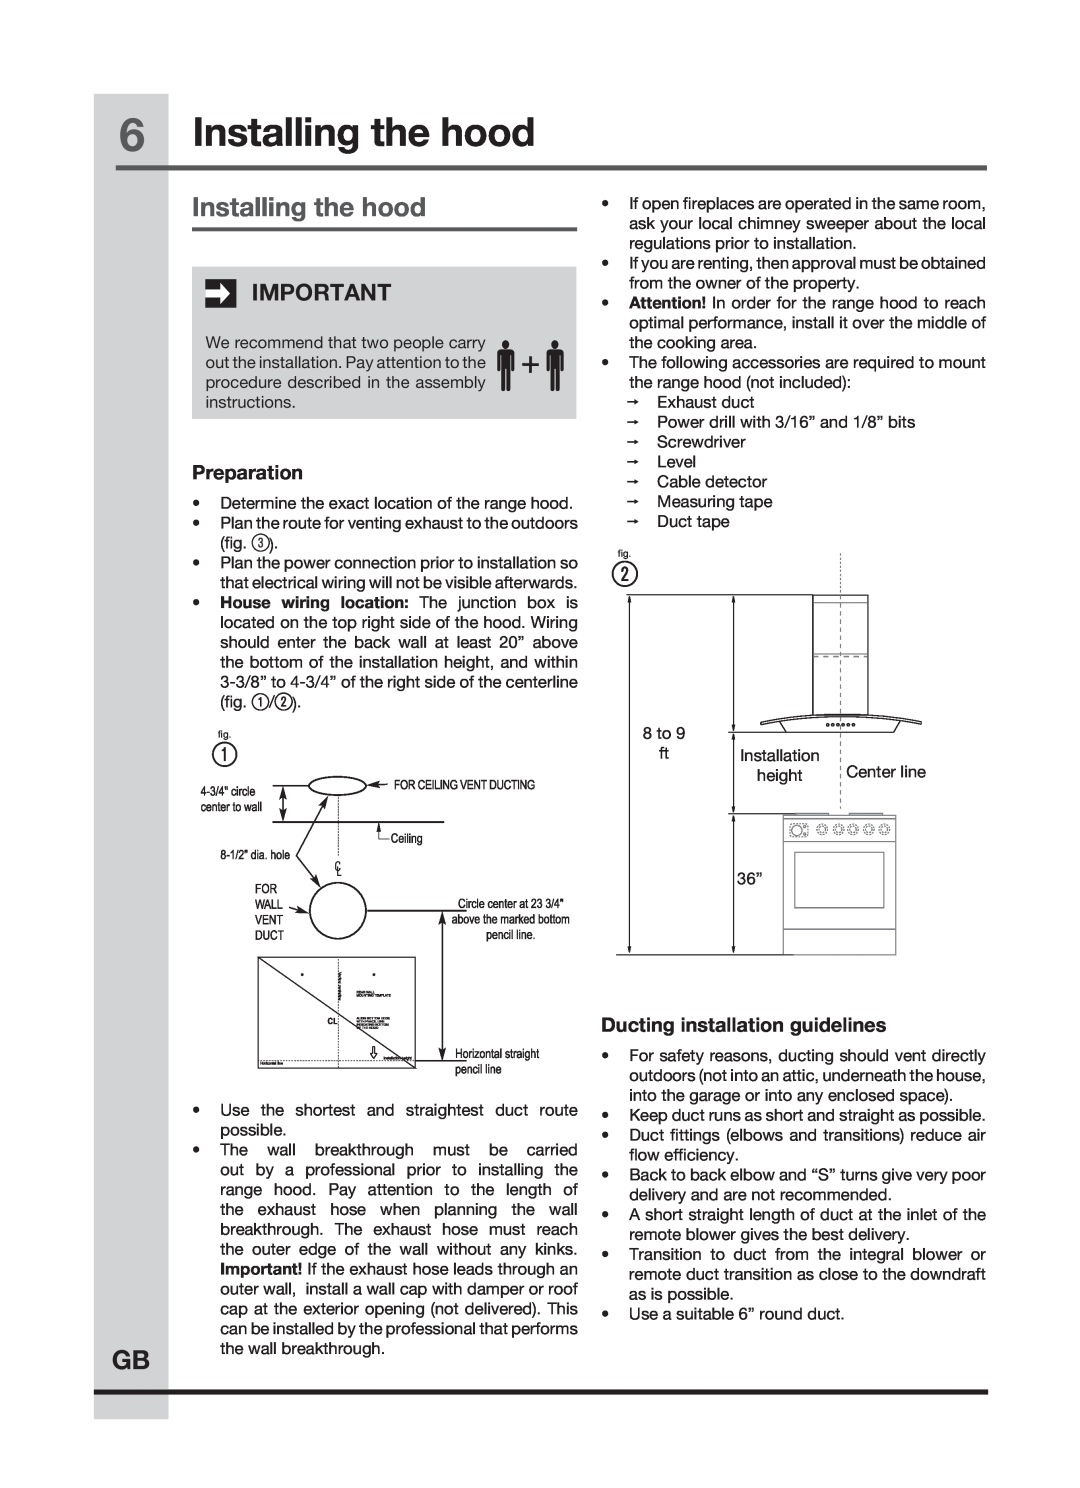 Frigidaire FHWC3660LS, FHWC3655LS, FHWC3060LS manual Installing the hood, Preparation, Ducting installation guidelines 